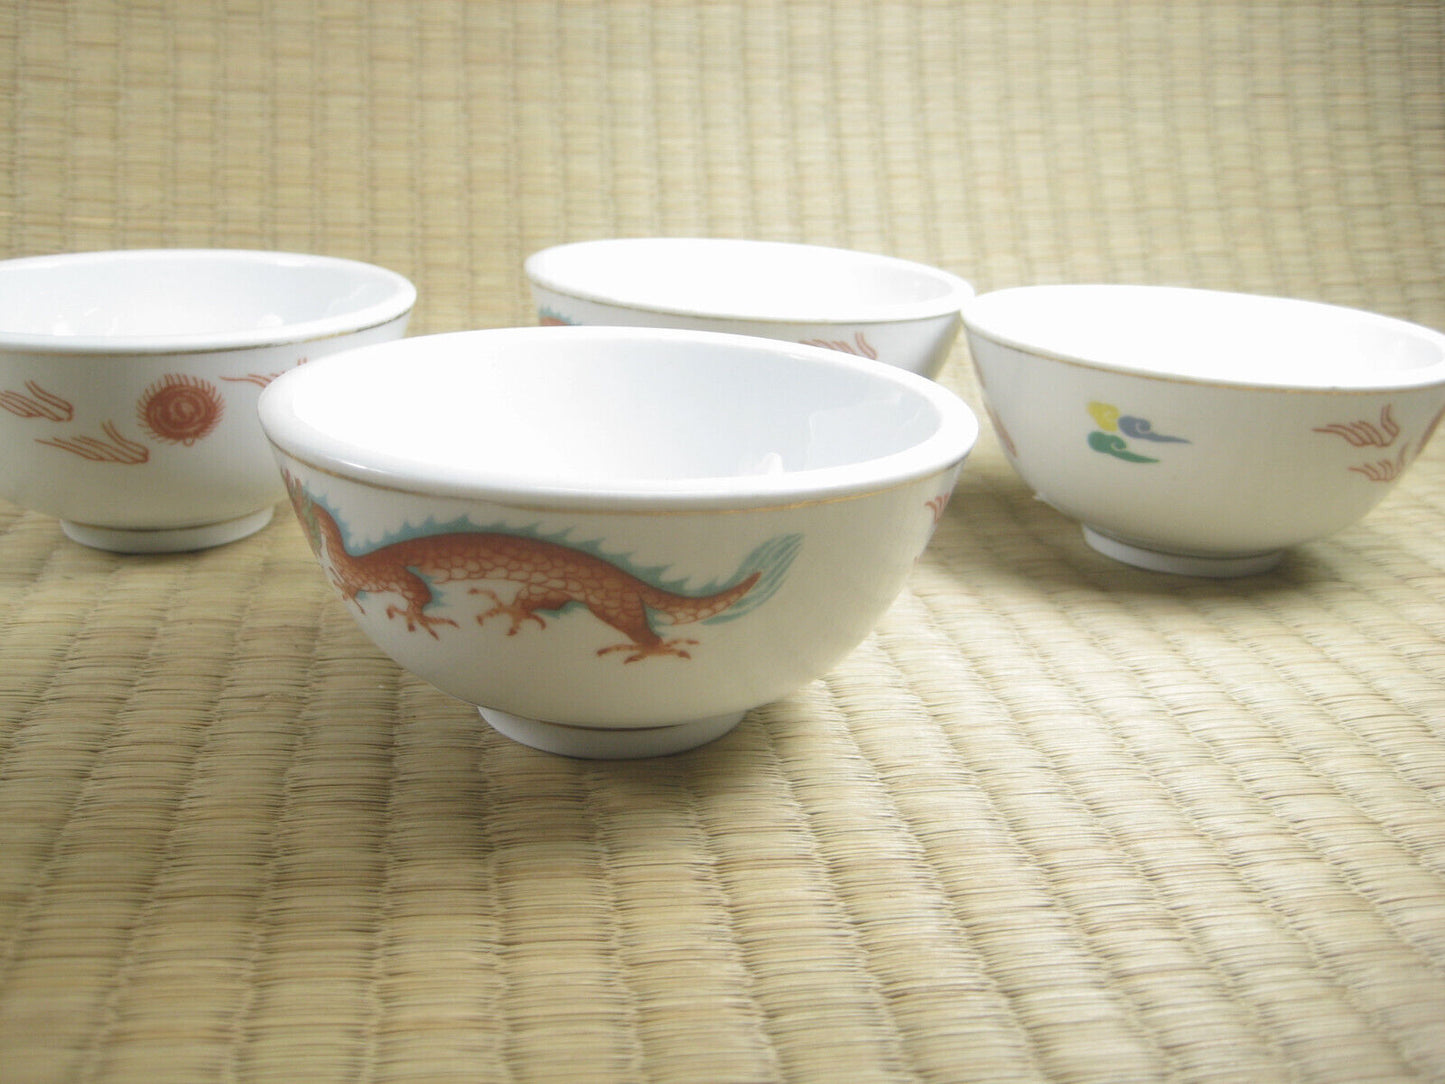 Vintage Chinese Resturaunt Soup Bowls With Red Dragon And Made In China Stamp